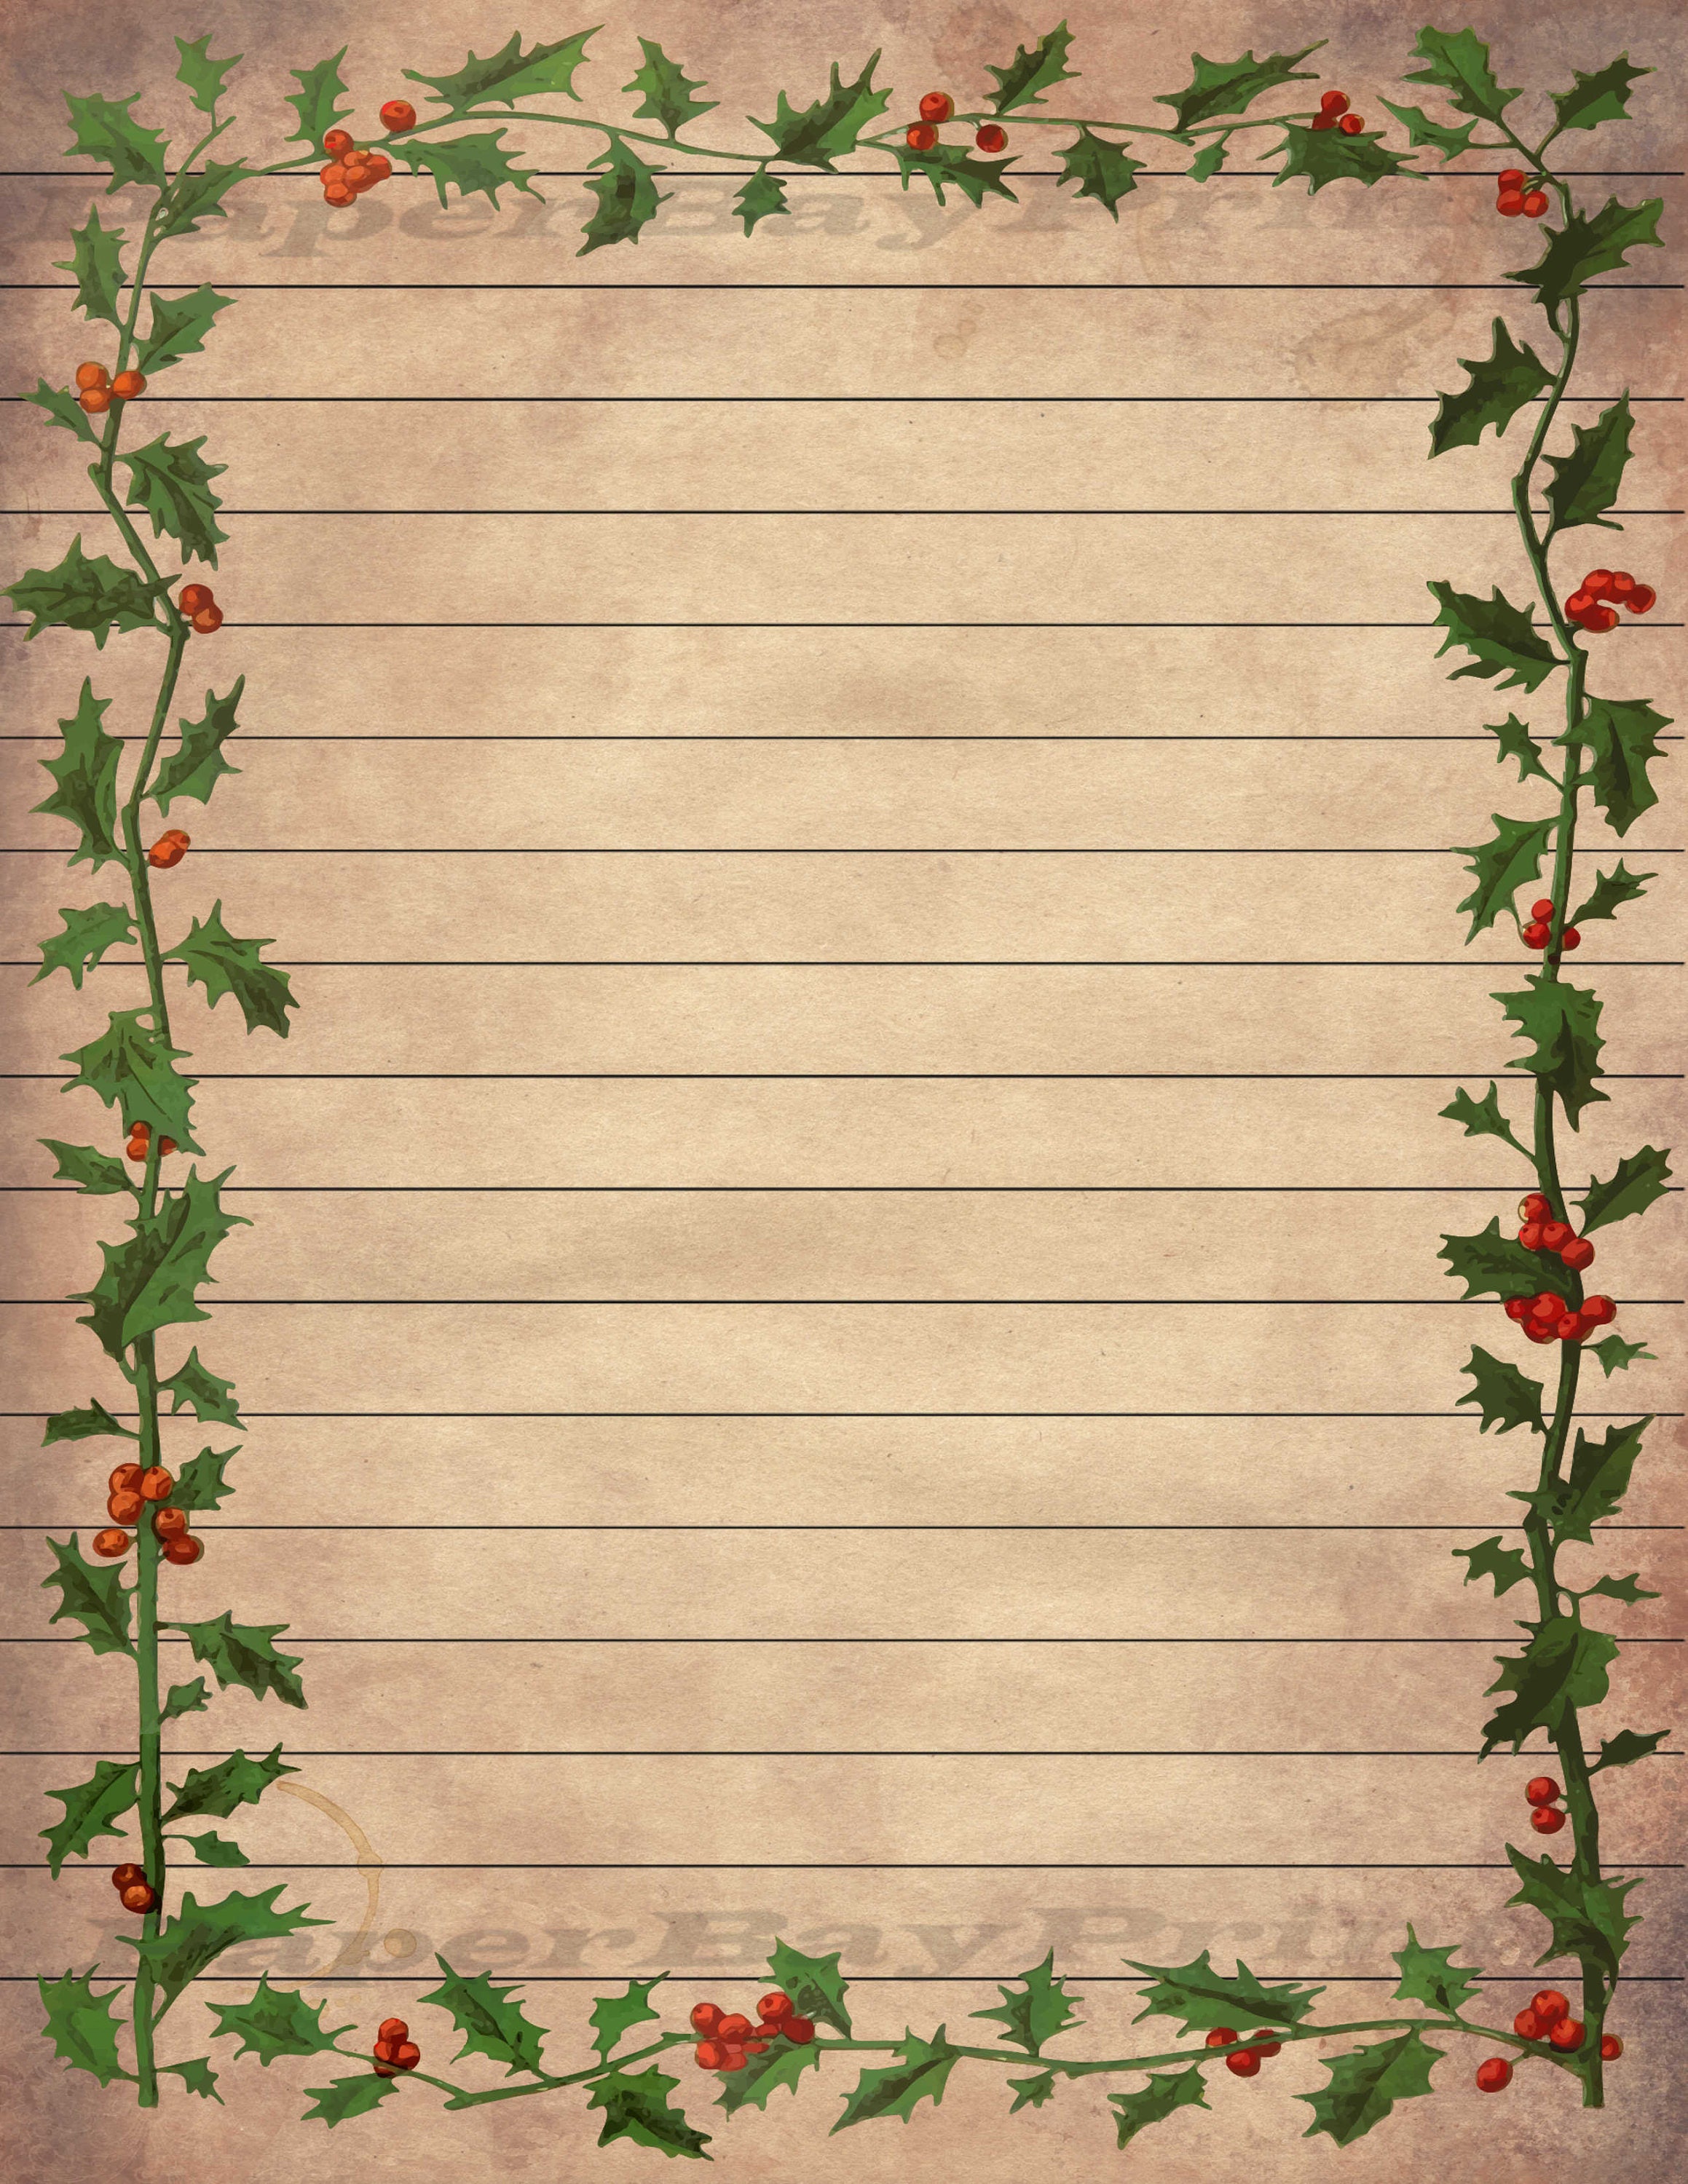 paper-borders-printables-free-printable-paper-border-designs-christian-clipart-best-free